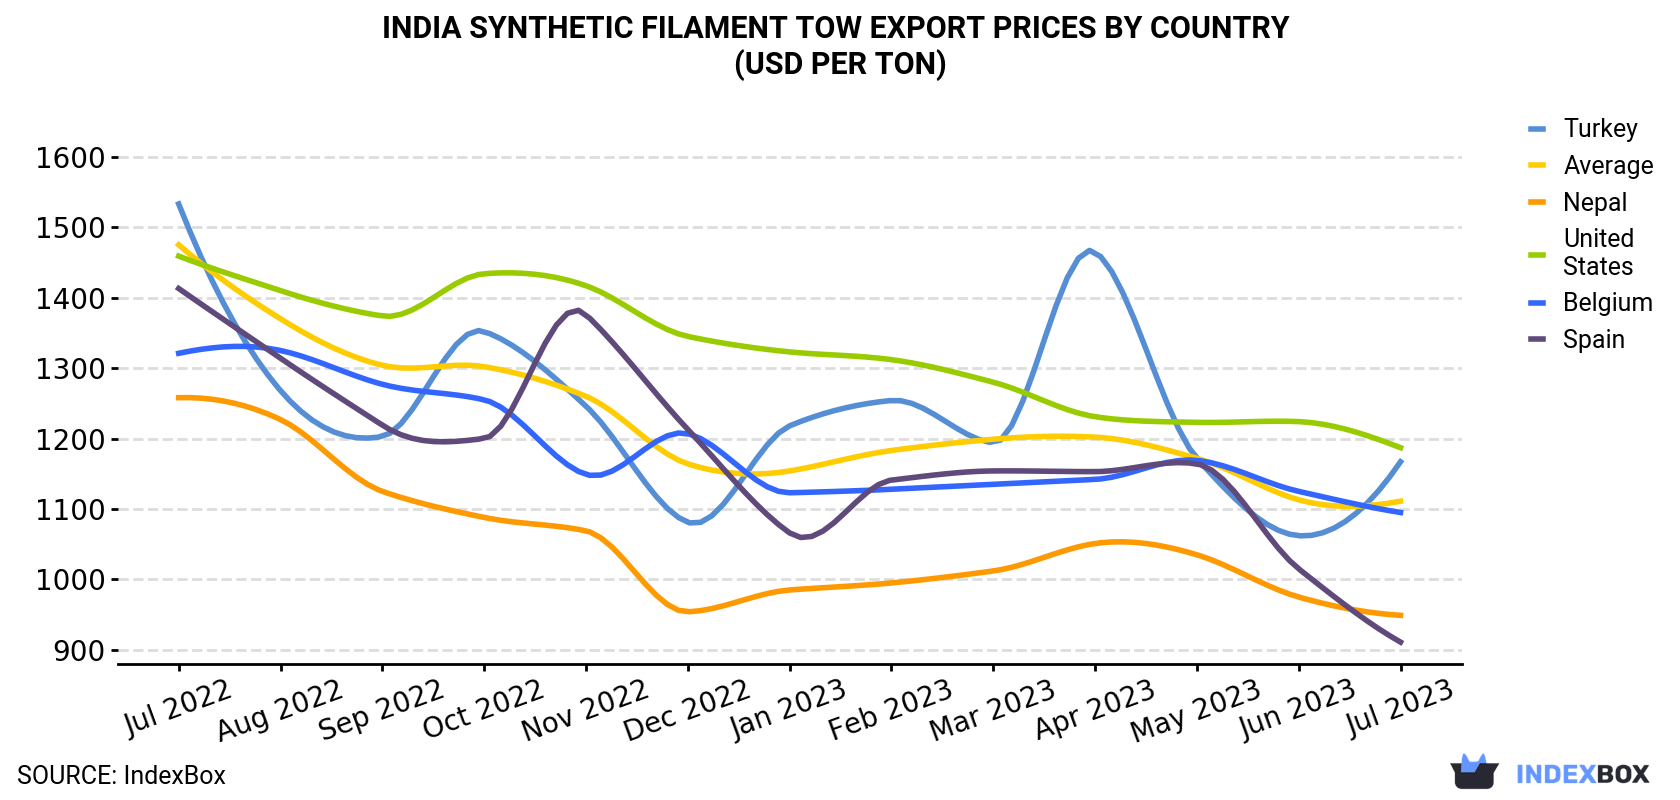 India Synthetic Filament Tow Export Prices By Country (USD Per Ton)